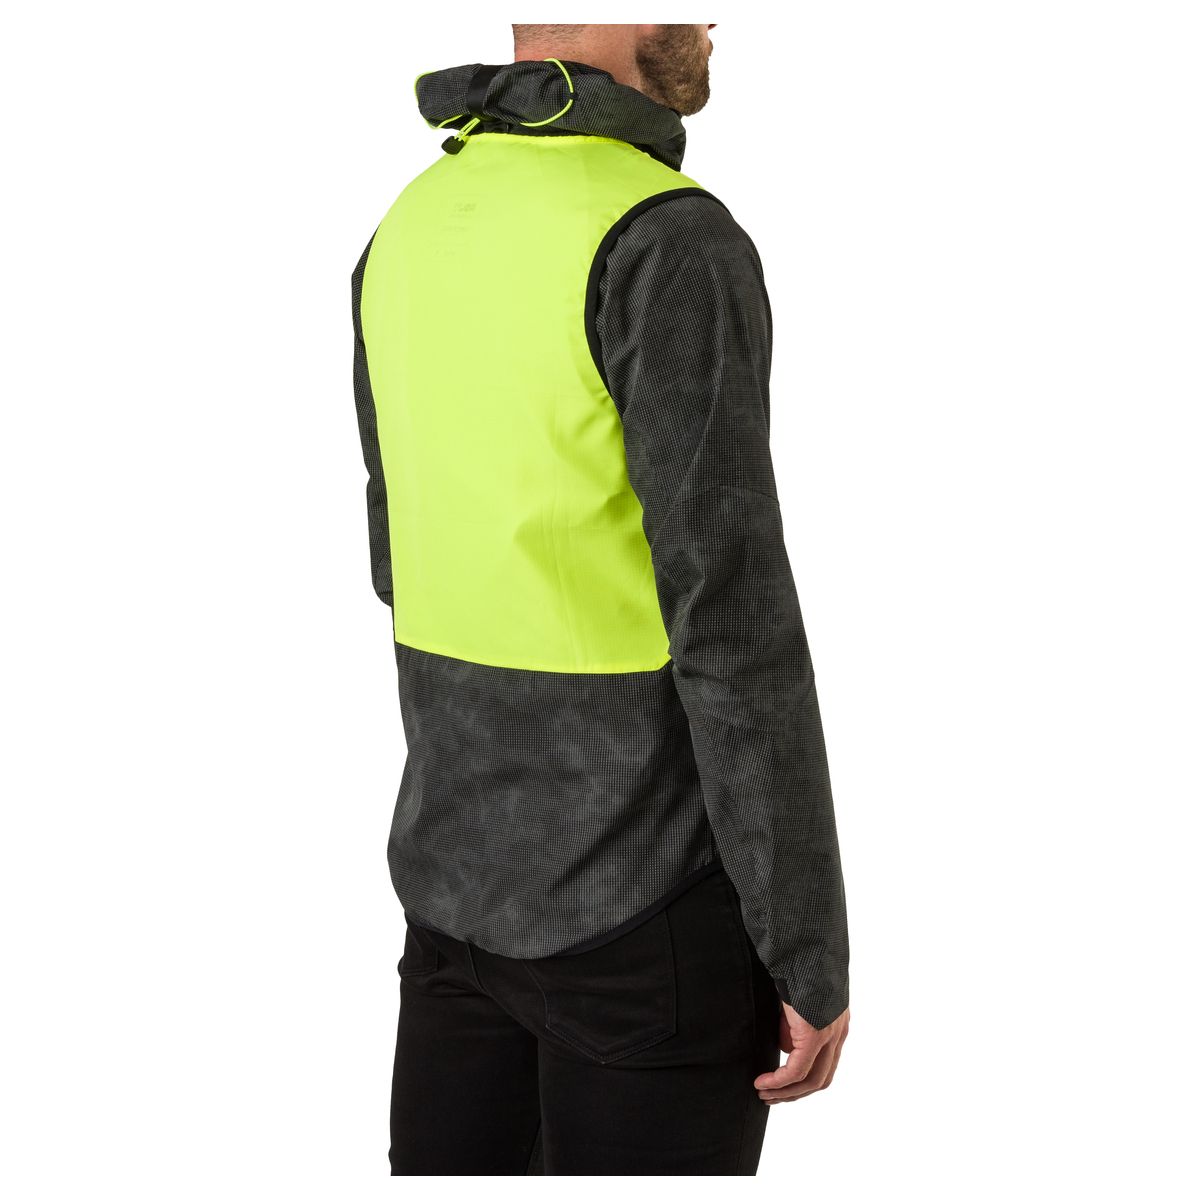 Compact Body Commuter Hi-vis & Reflection fit example